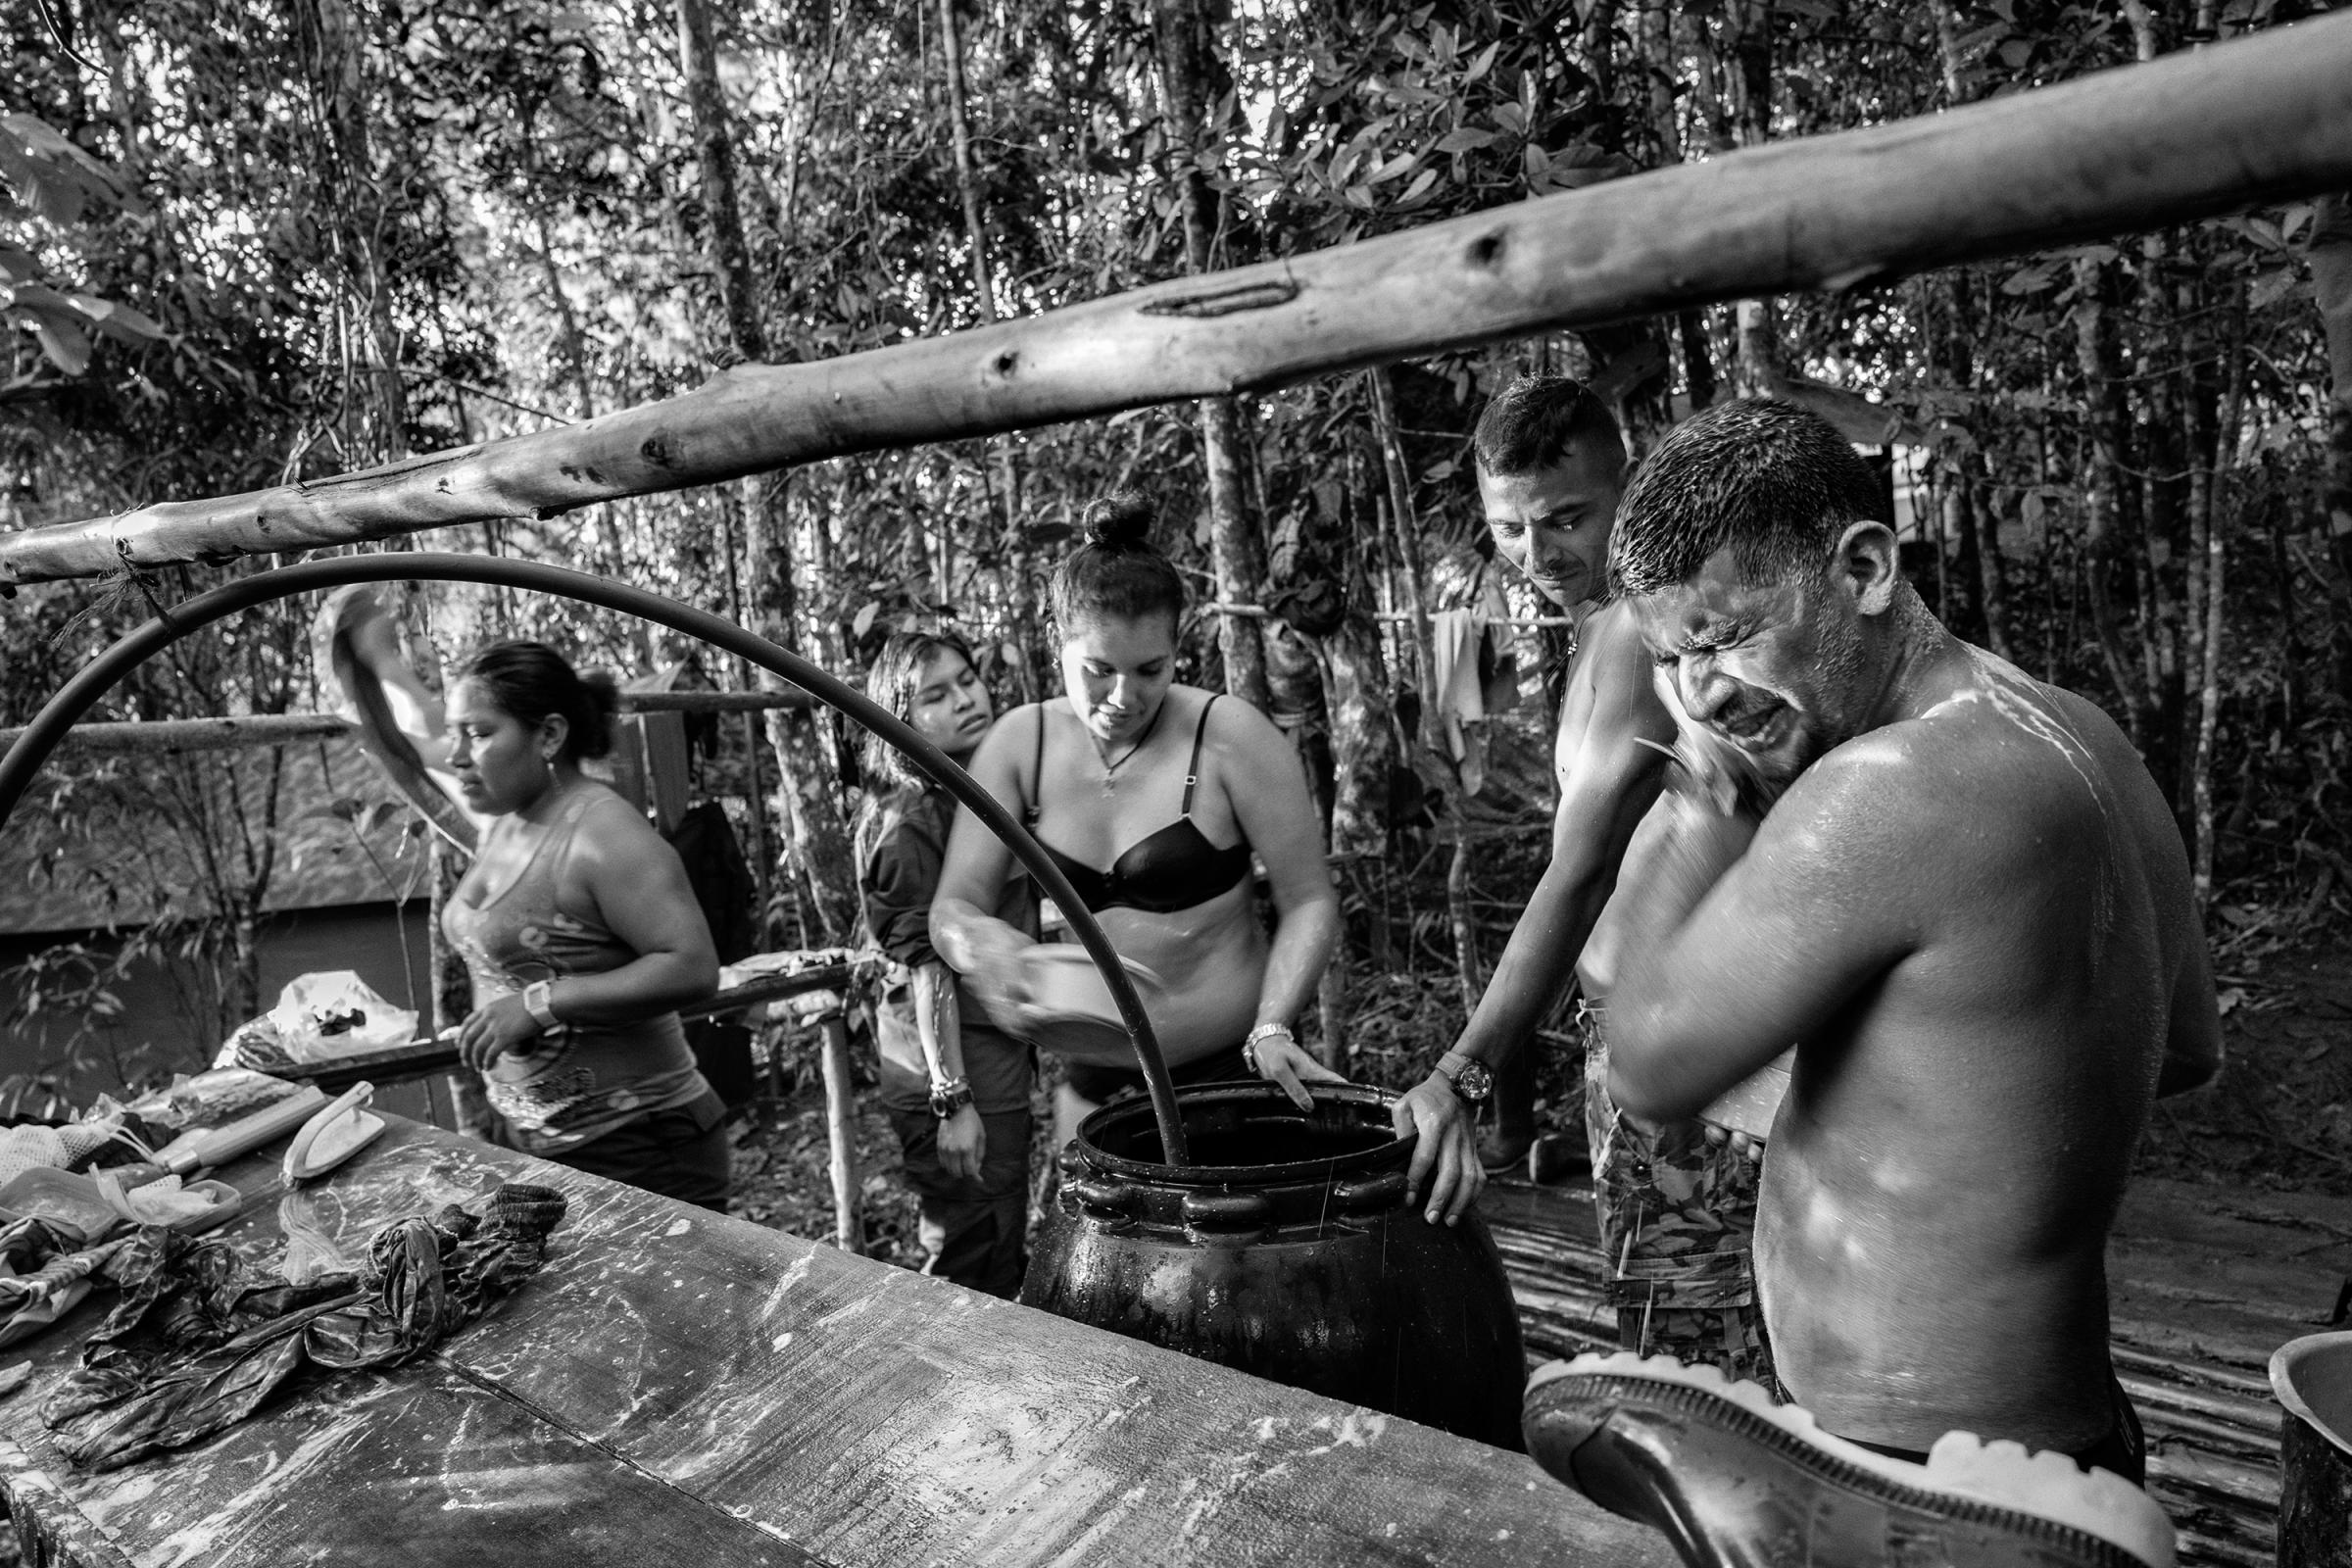 FARC guerrilla members shower at a camp, Cauca, Colombia, July 2016.